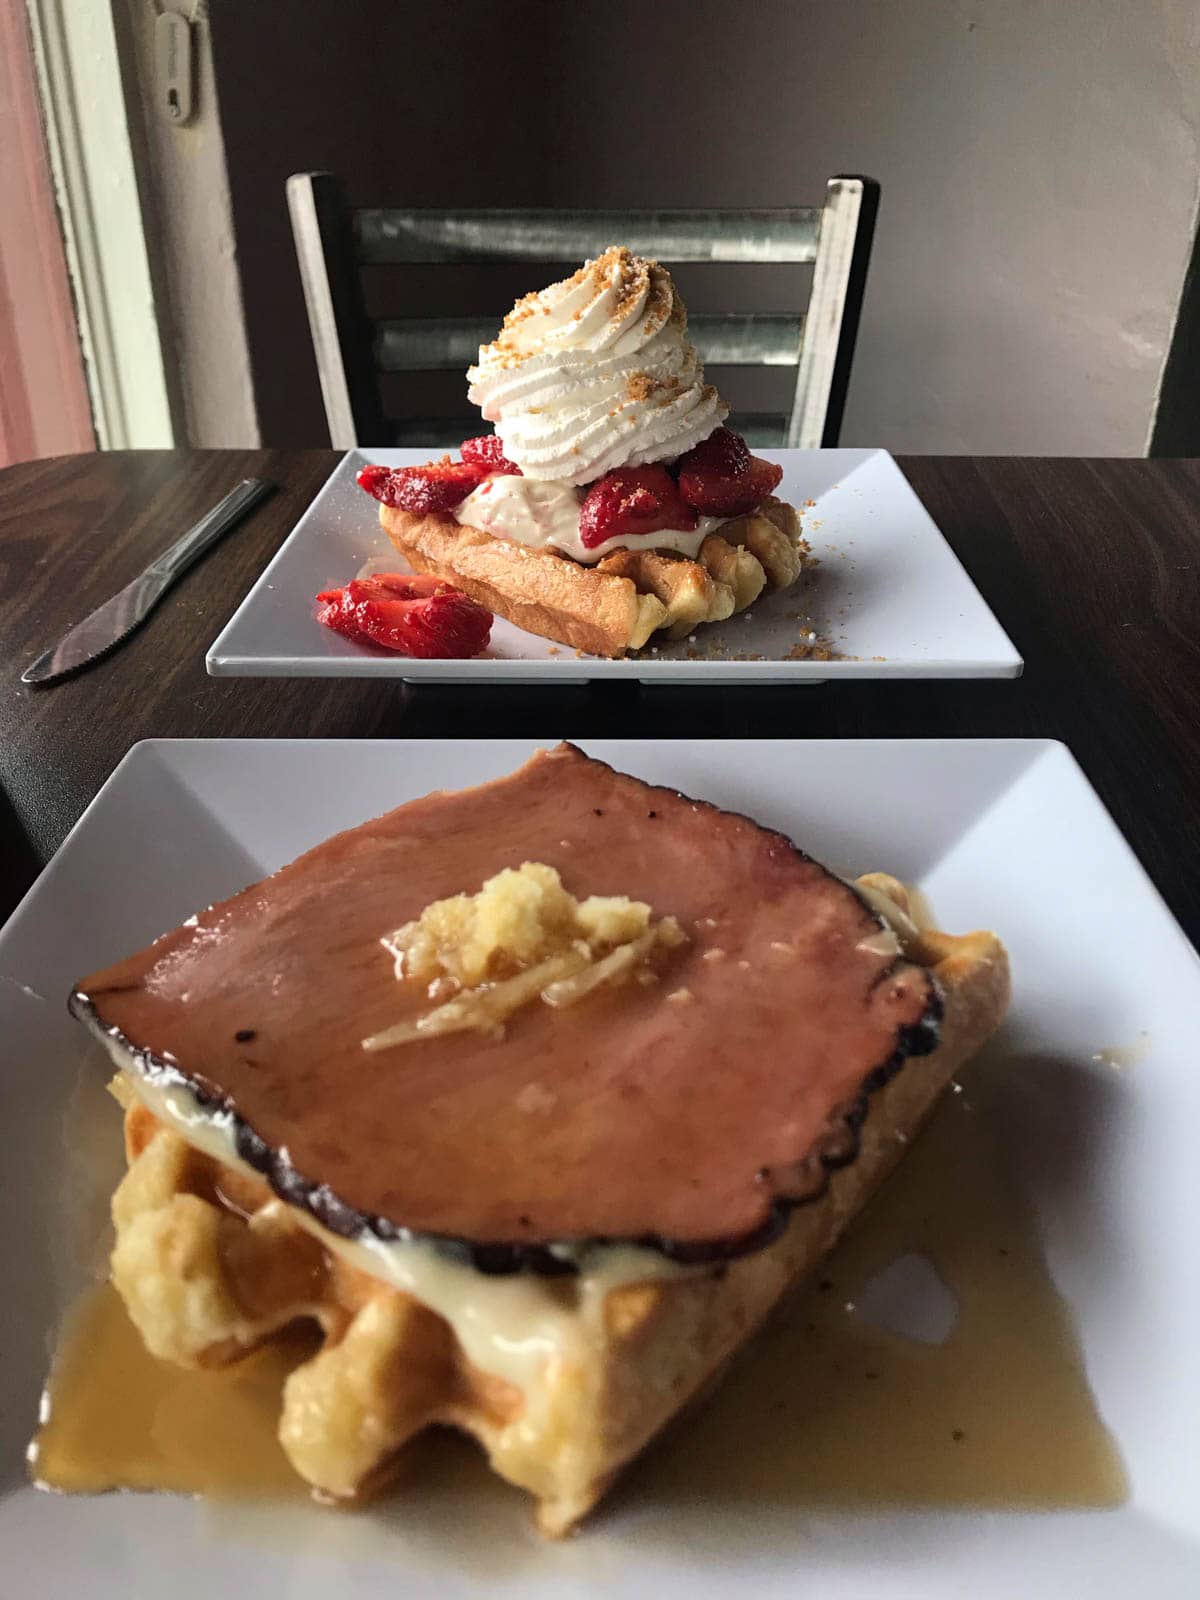 Two waffles served on square dishes. One is topped with ham and cheese, and the one in the background is topped with strawberries and whipped cream.